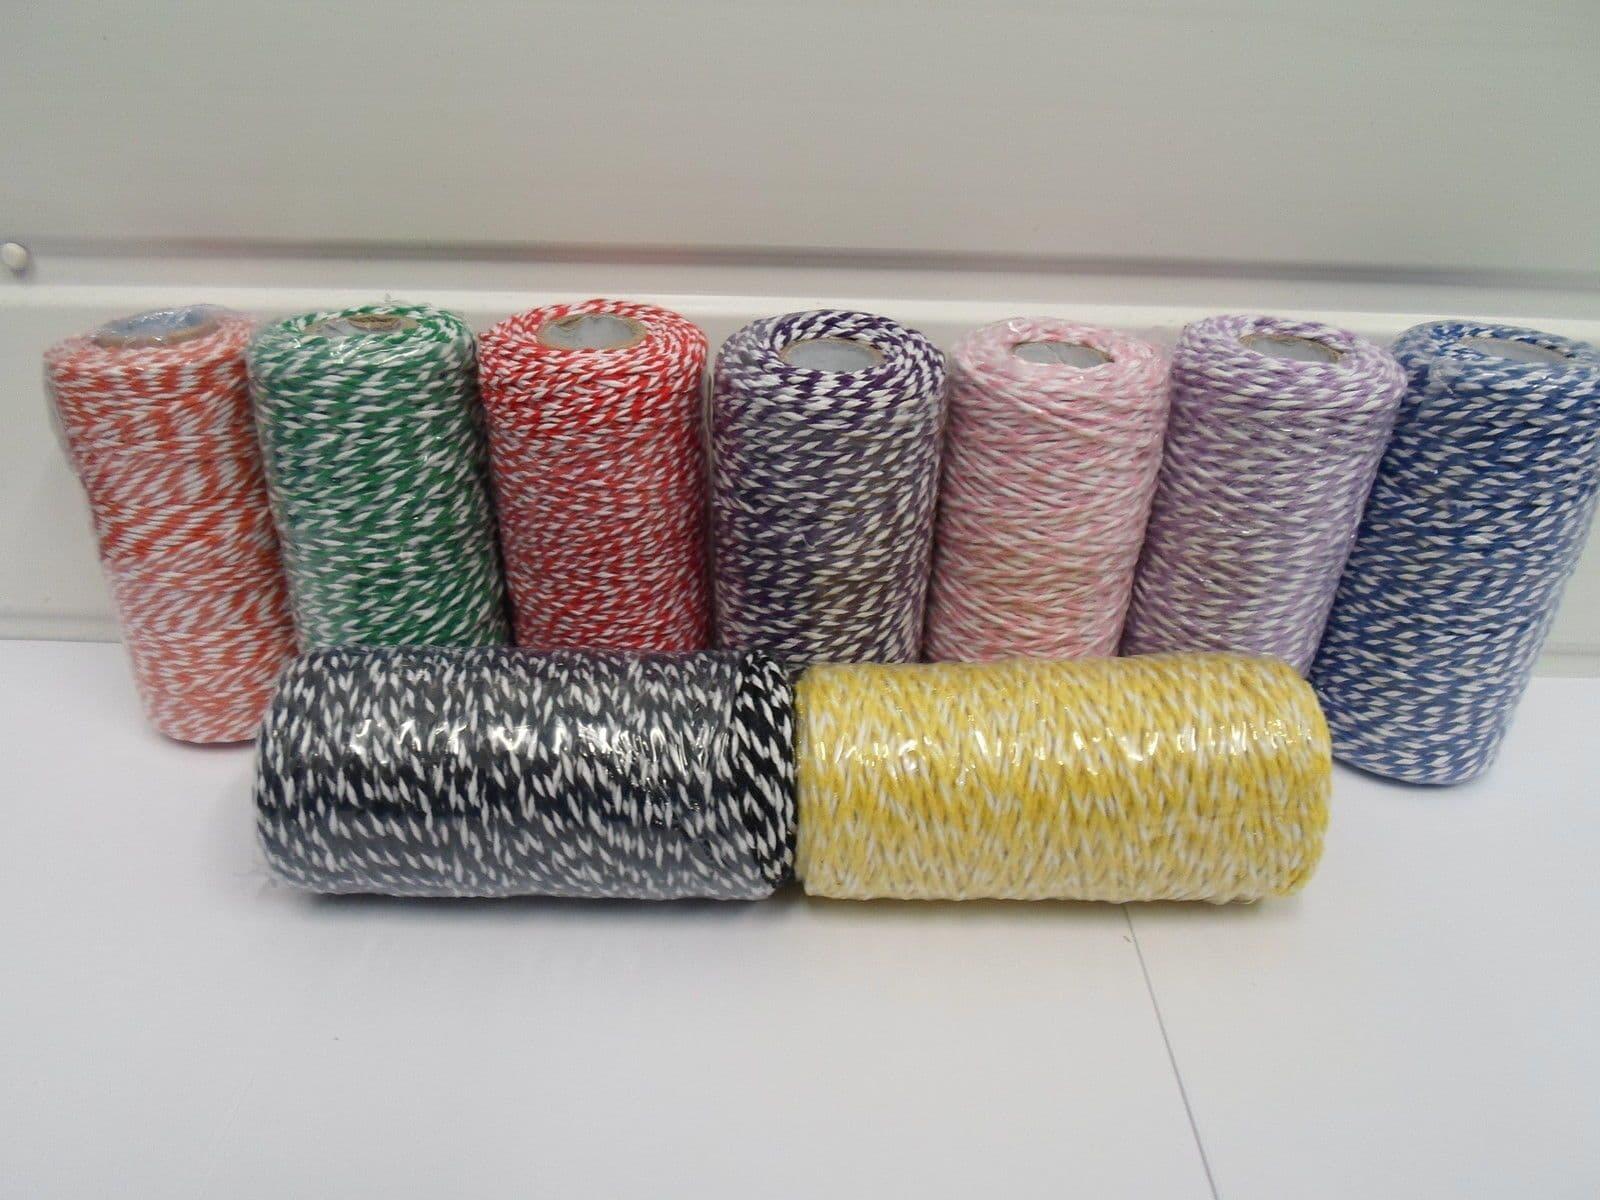 Black & White 2 metres or Full 100m Roll Bakers 1mm Twine Rope